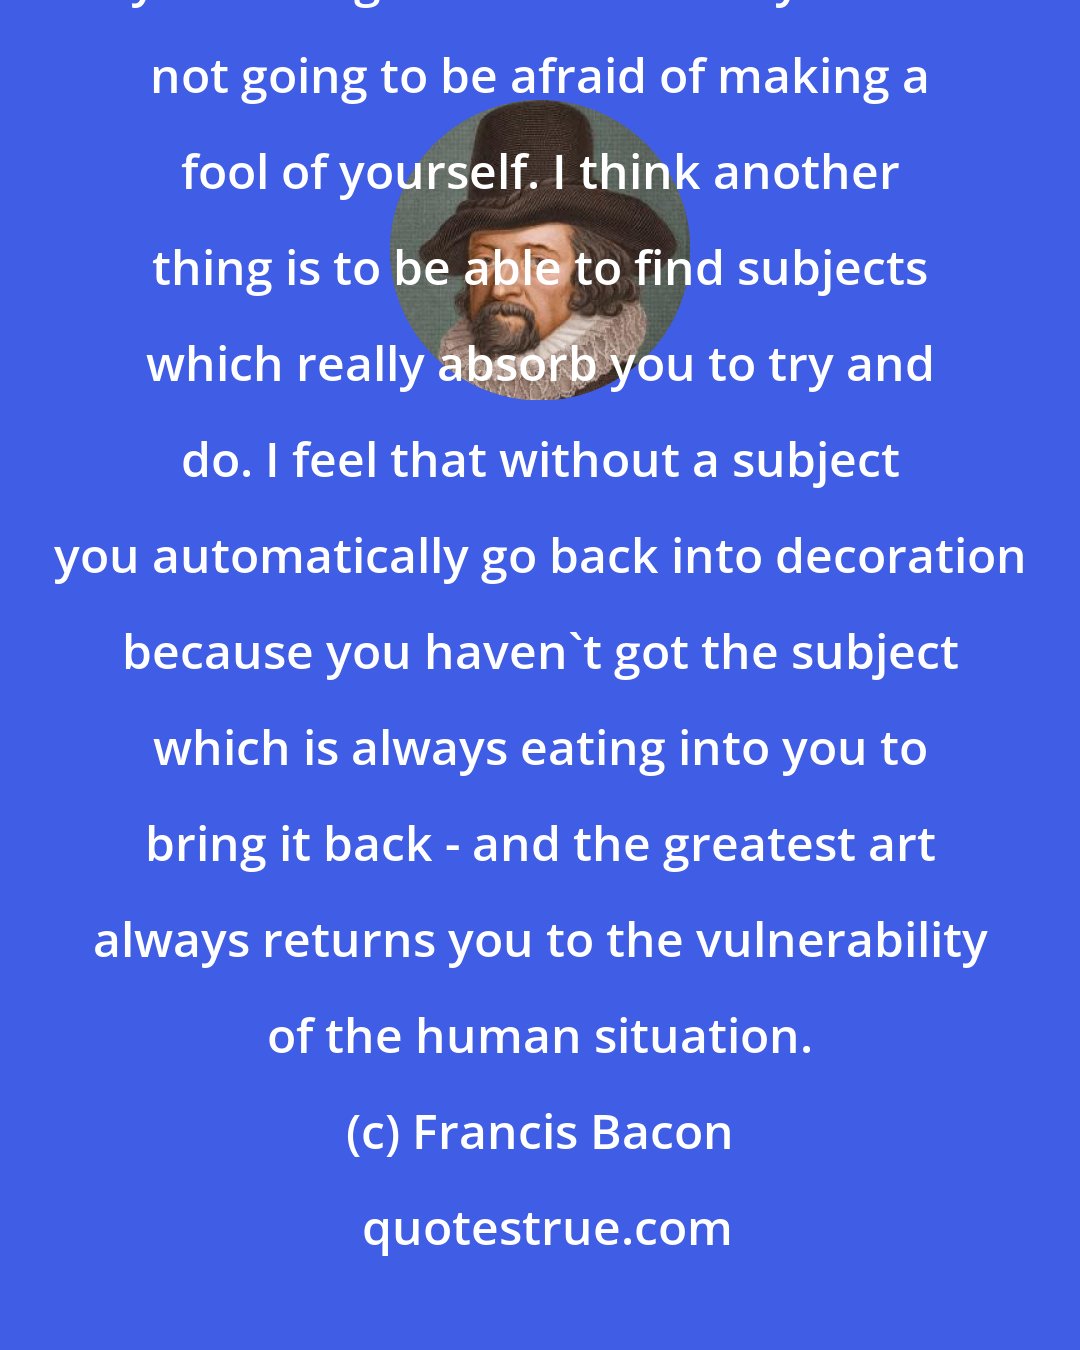 Francis Bacon: I think that one of the things is that, if you are going to decide to be a painter, you have got to decide that you are not going to be afraid of making a fool of yourself. I think another thing is to be able to find subjects which really absorb you to try and do. I feel that without a subject you automatically go back into decoration because you haven't got the subject which is always eating into you to bring it back - and the greatest art always returns you to the vulnerability of the human situation.